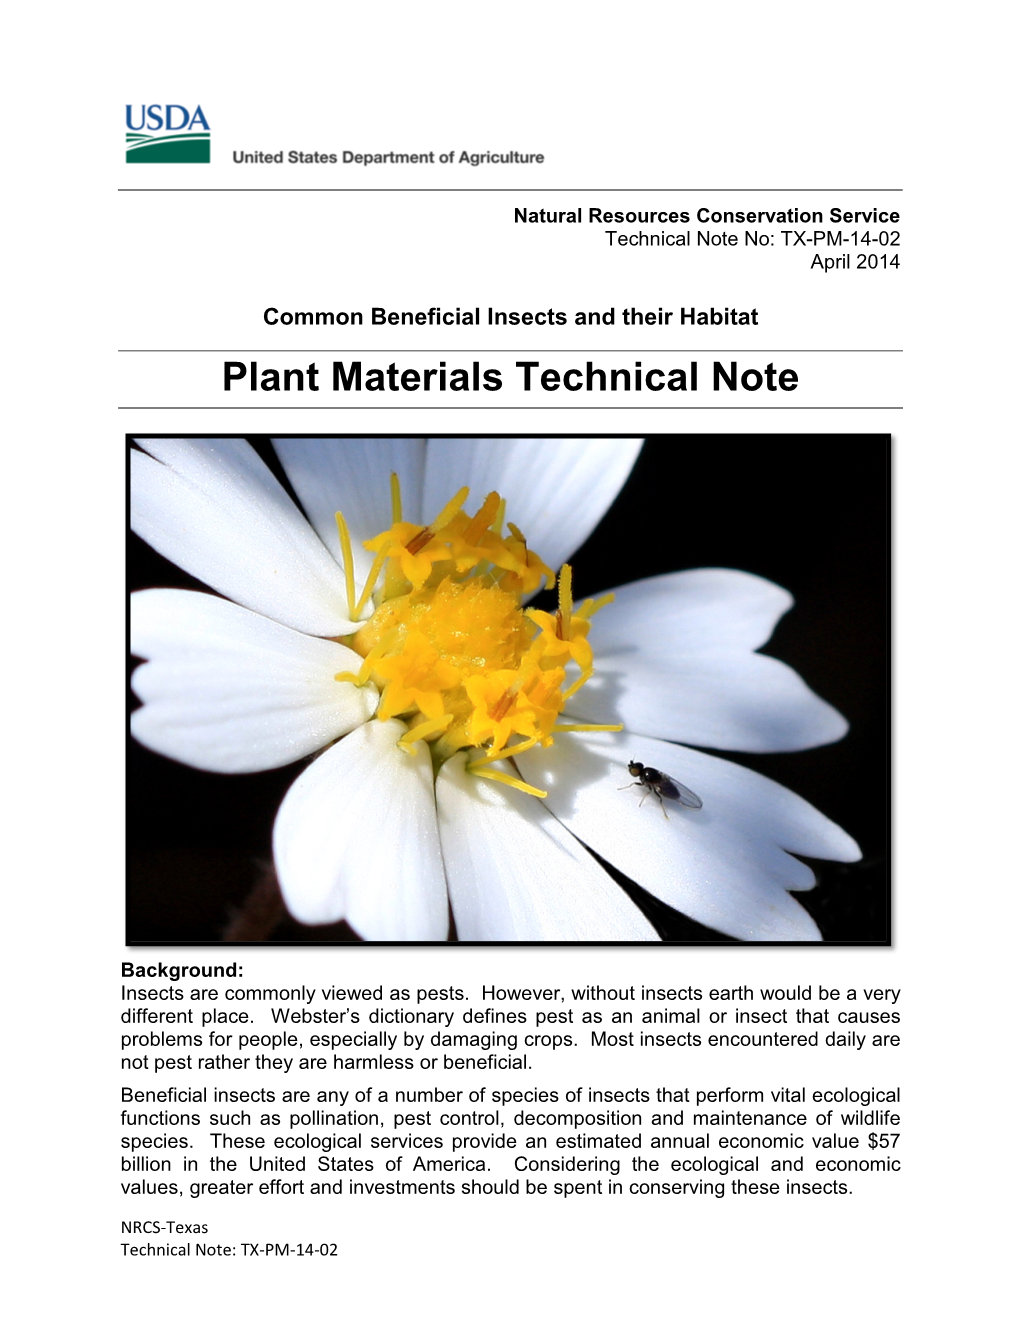 Common Beneficial Insects and Their Habitat Plant Materials Technical Note